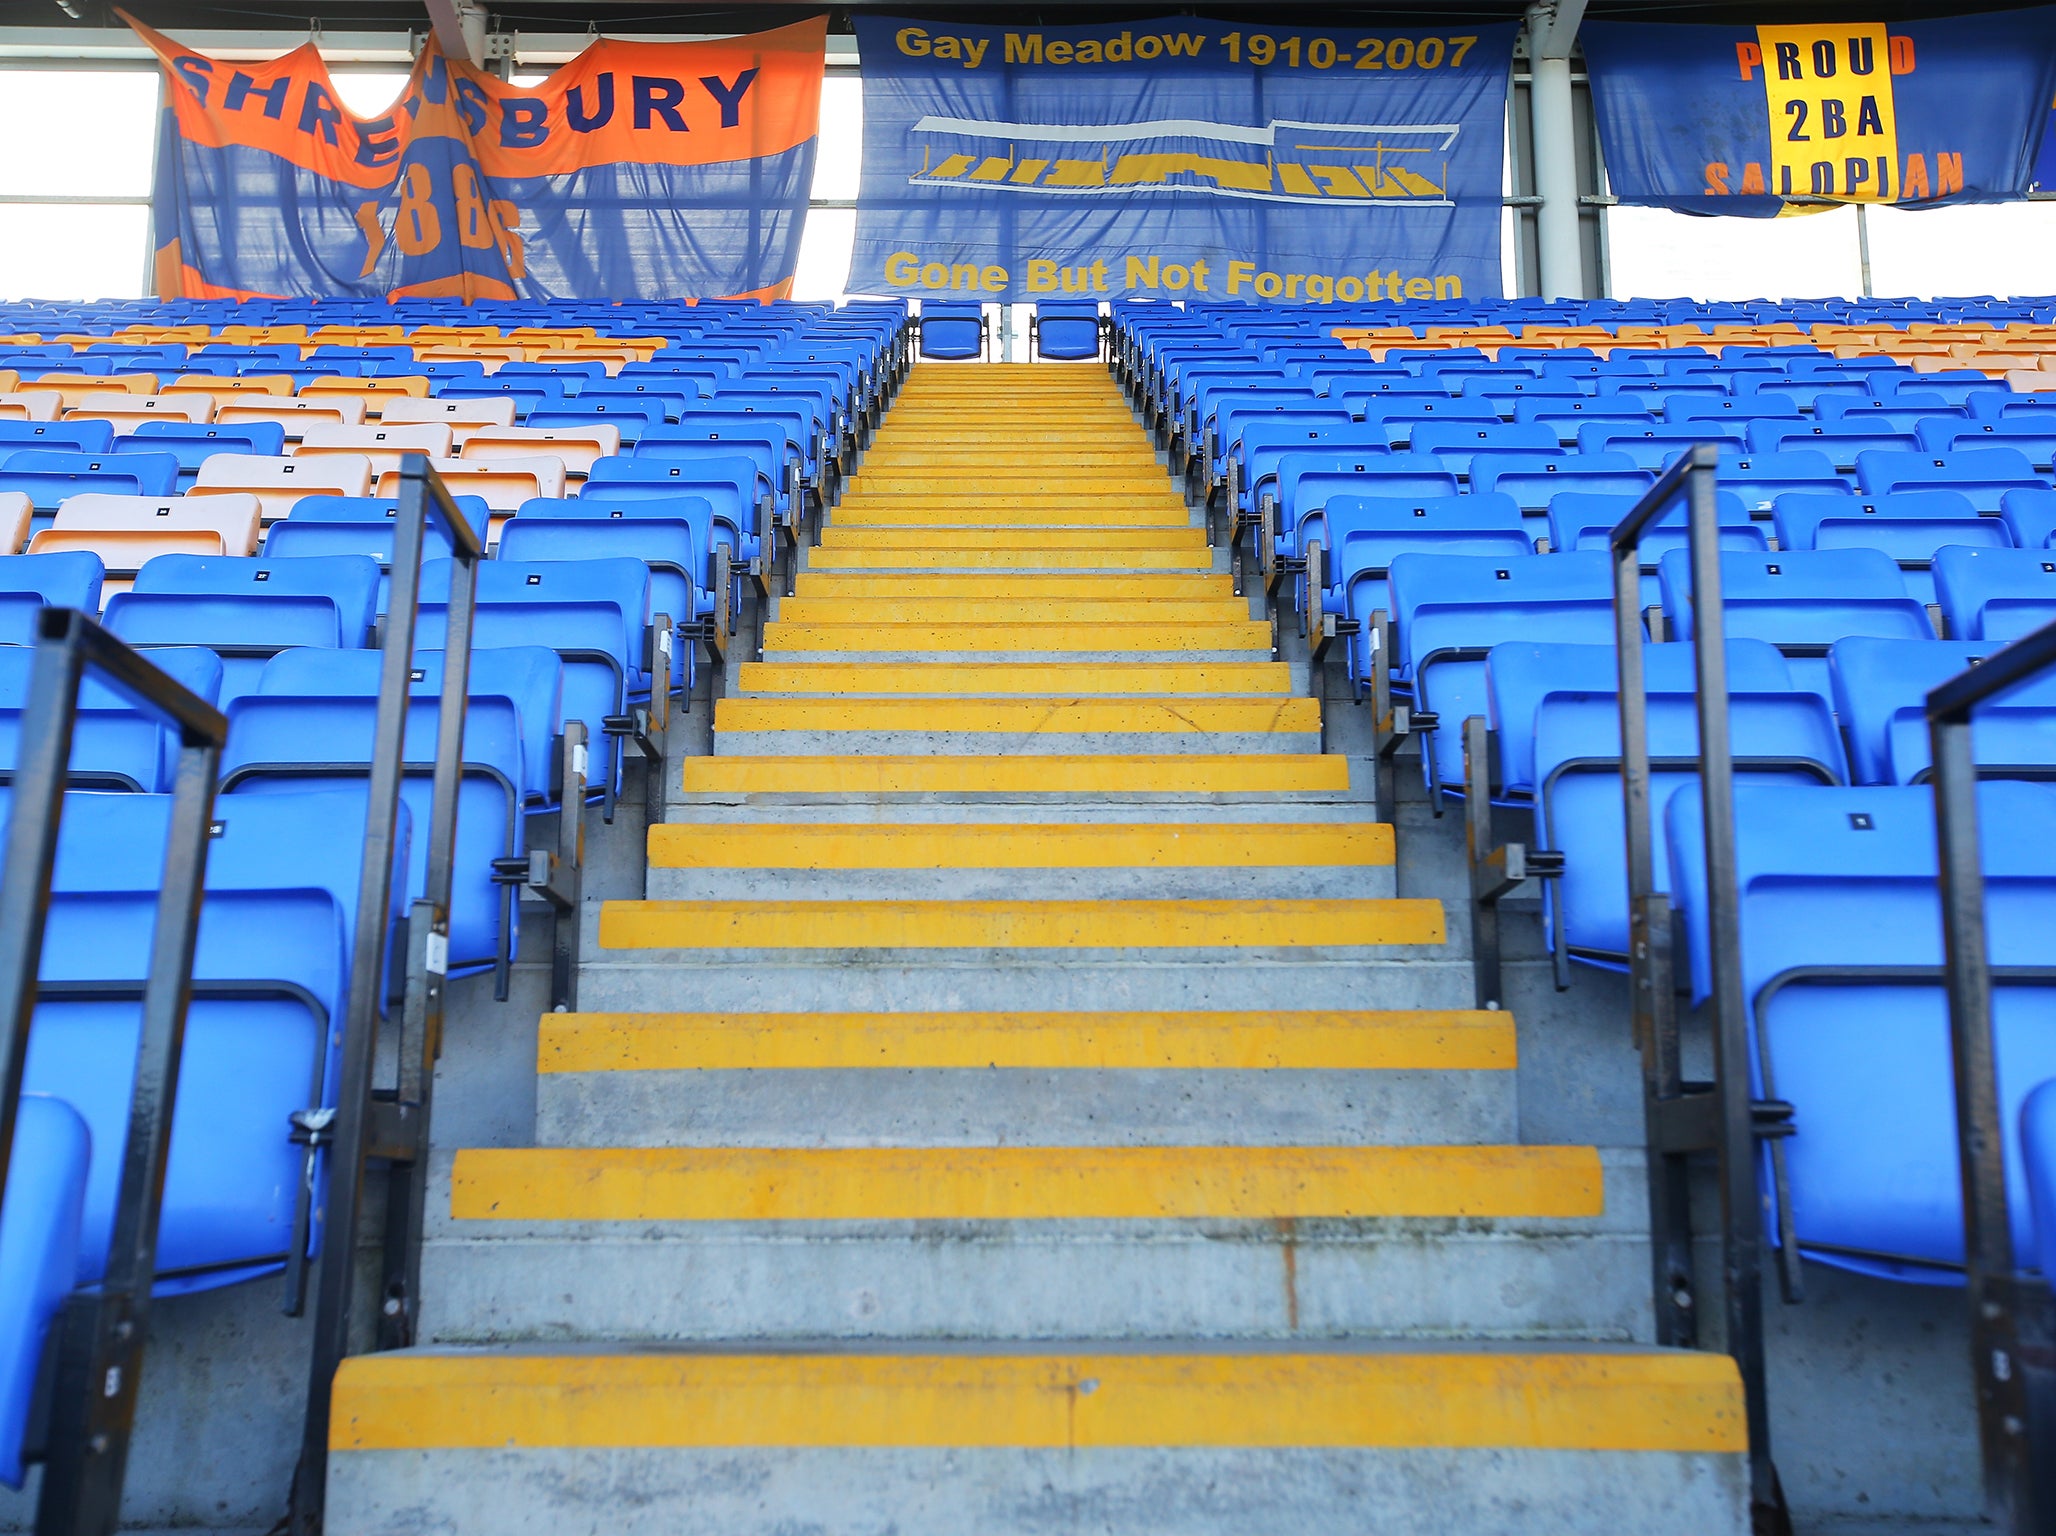 Shrewsbury plan to introduce safe standing at their New Meadow home this season